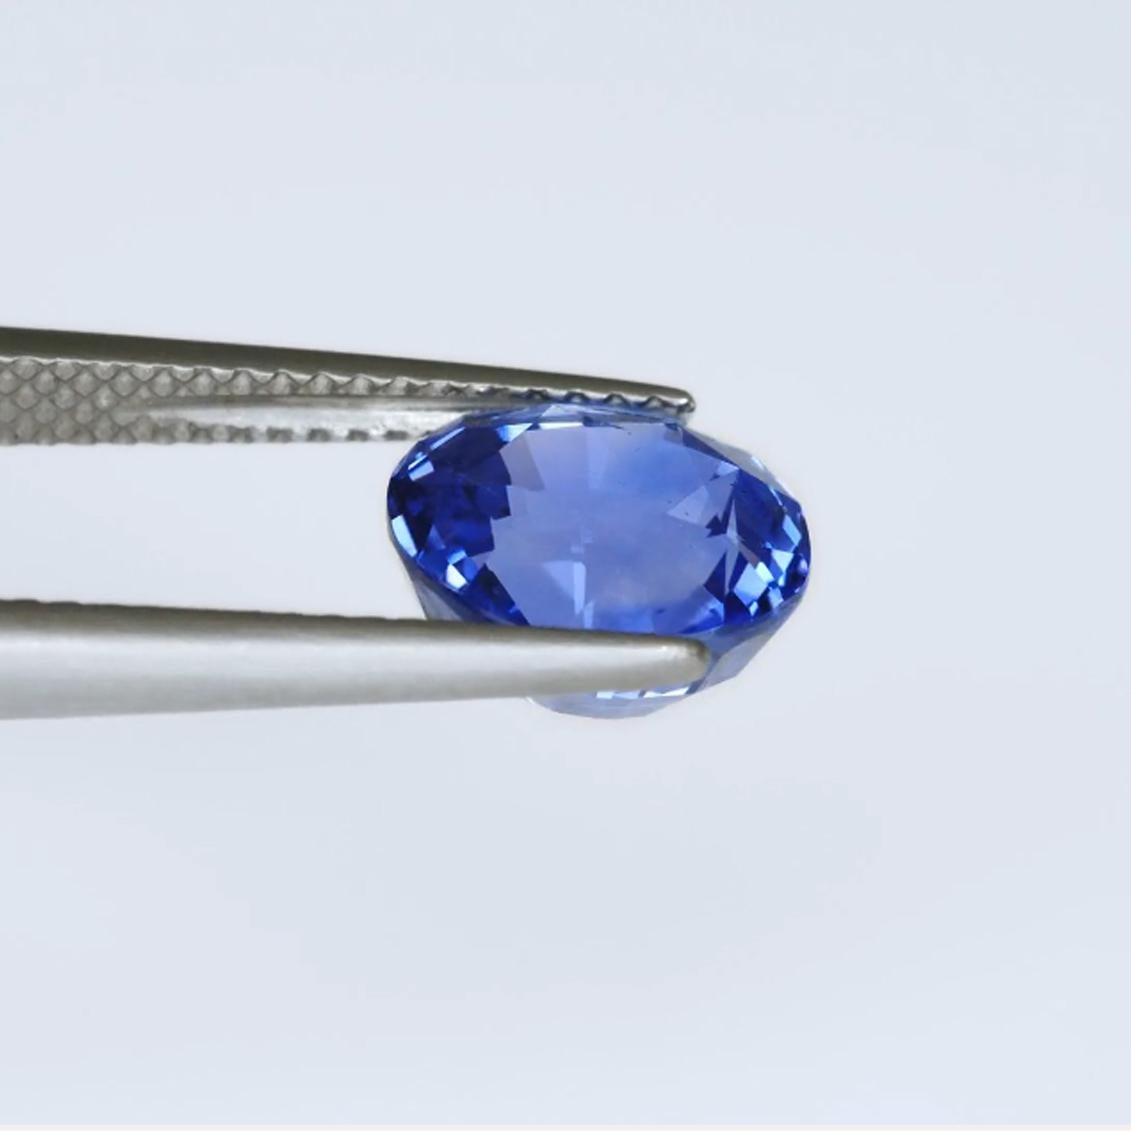 Women's or Men's Gublin and GRS Certified 4.17ct Srilankan Blue Sapphire Natural Gemstone For Sale